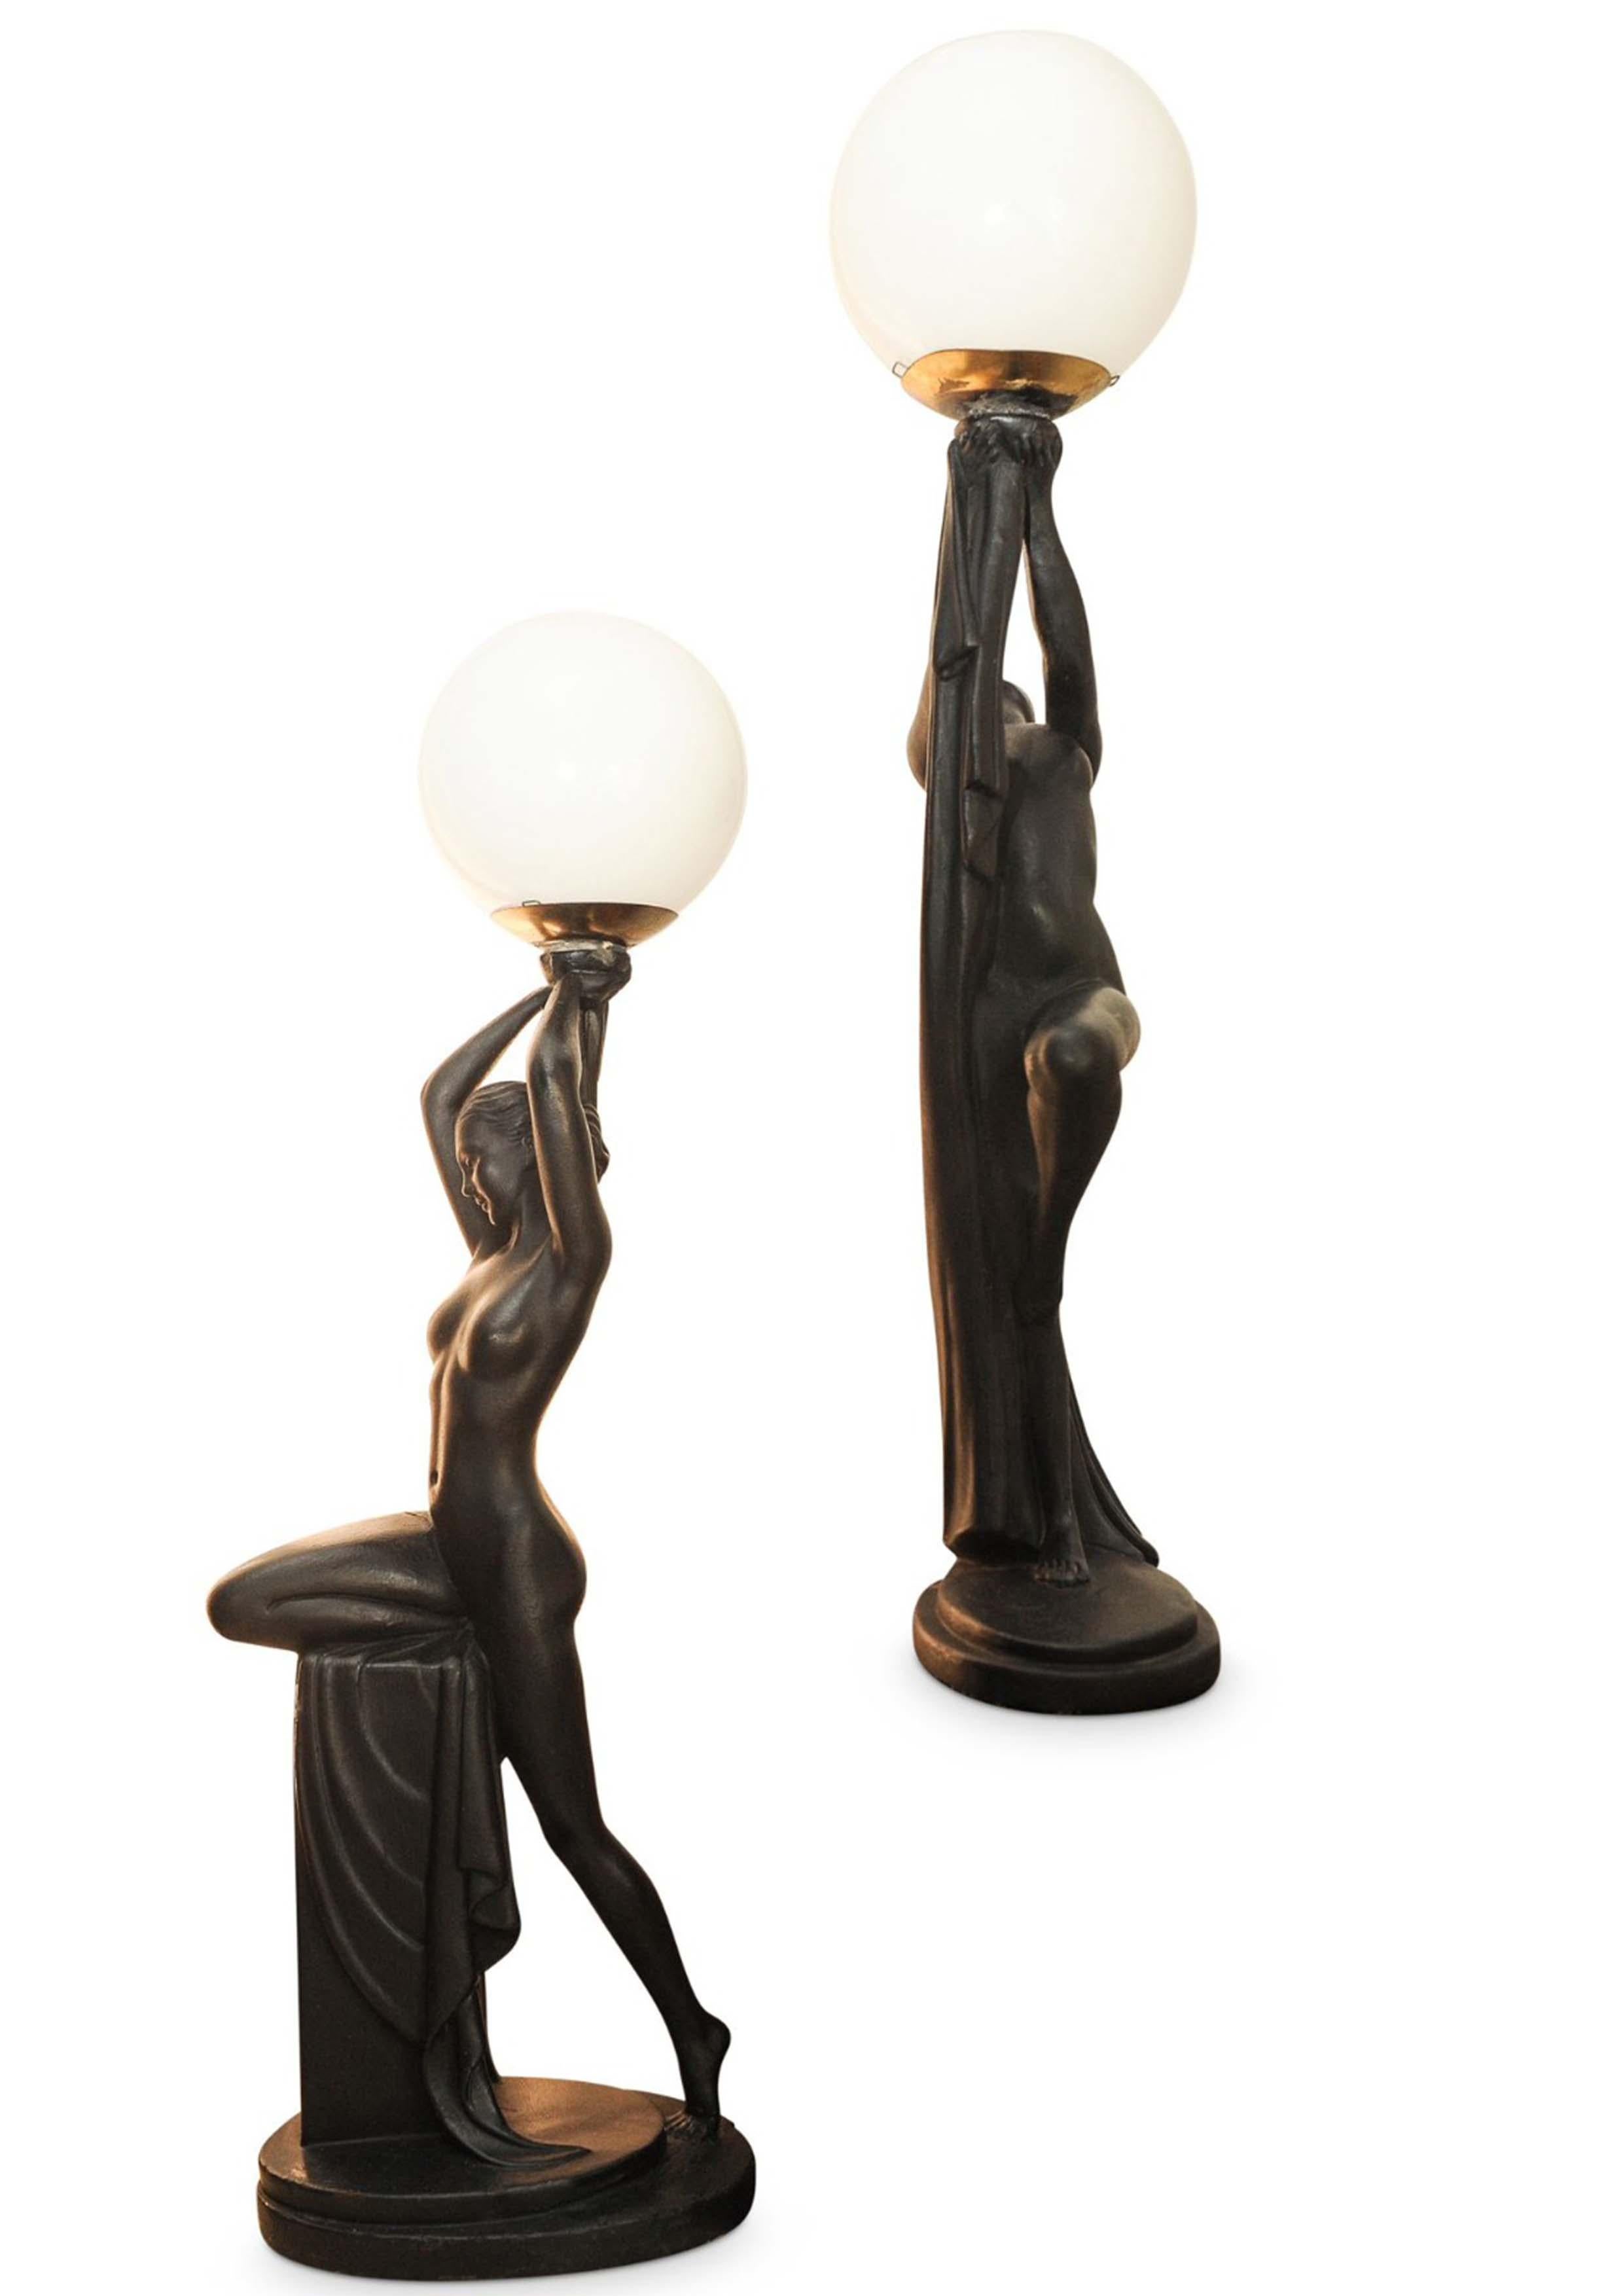 Hand-Painted Pair of Exquisite Art Deco Ebonized Plaster Nude Feminine Form Table Lamps 1930s For Sale